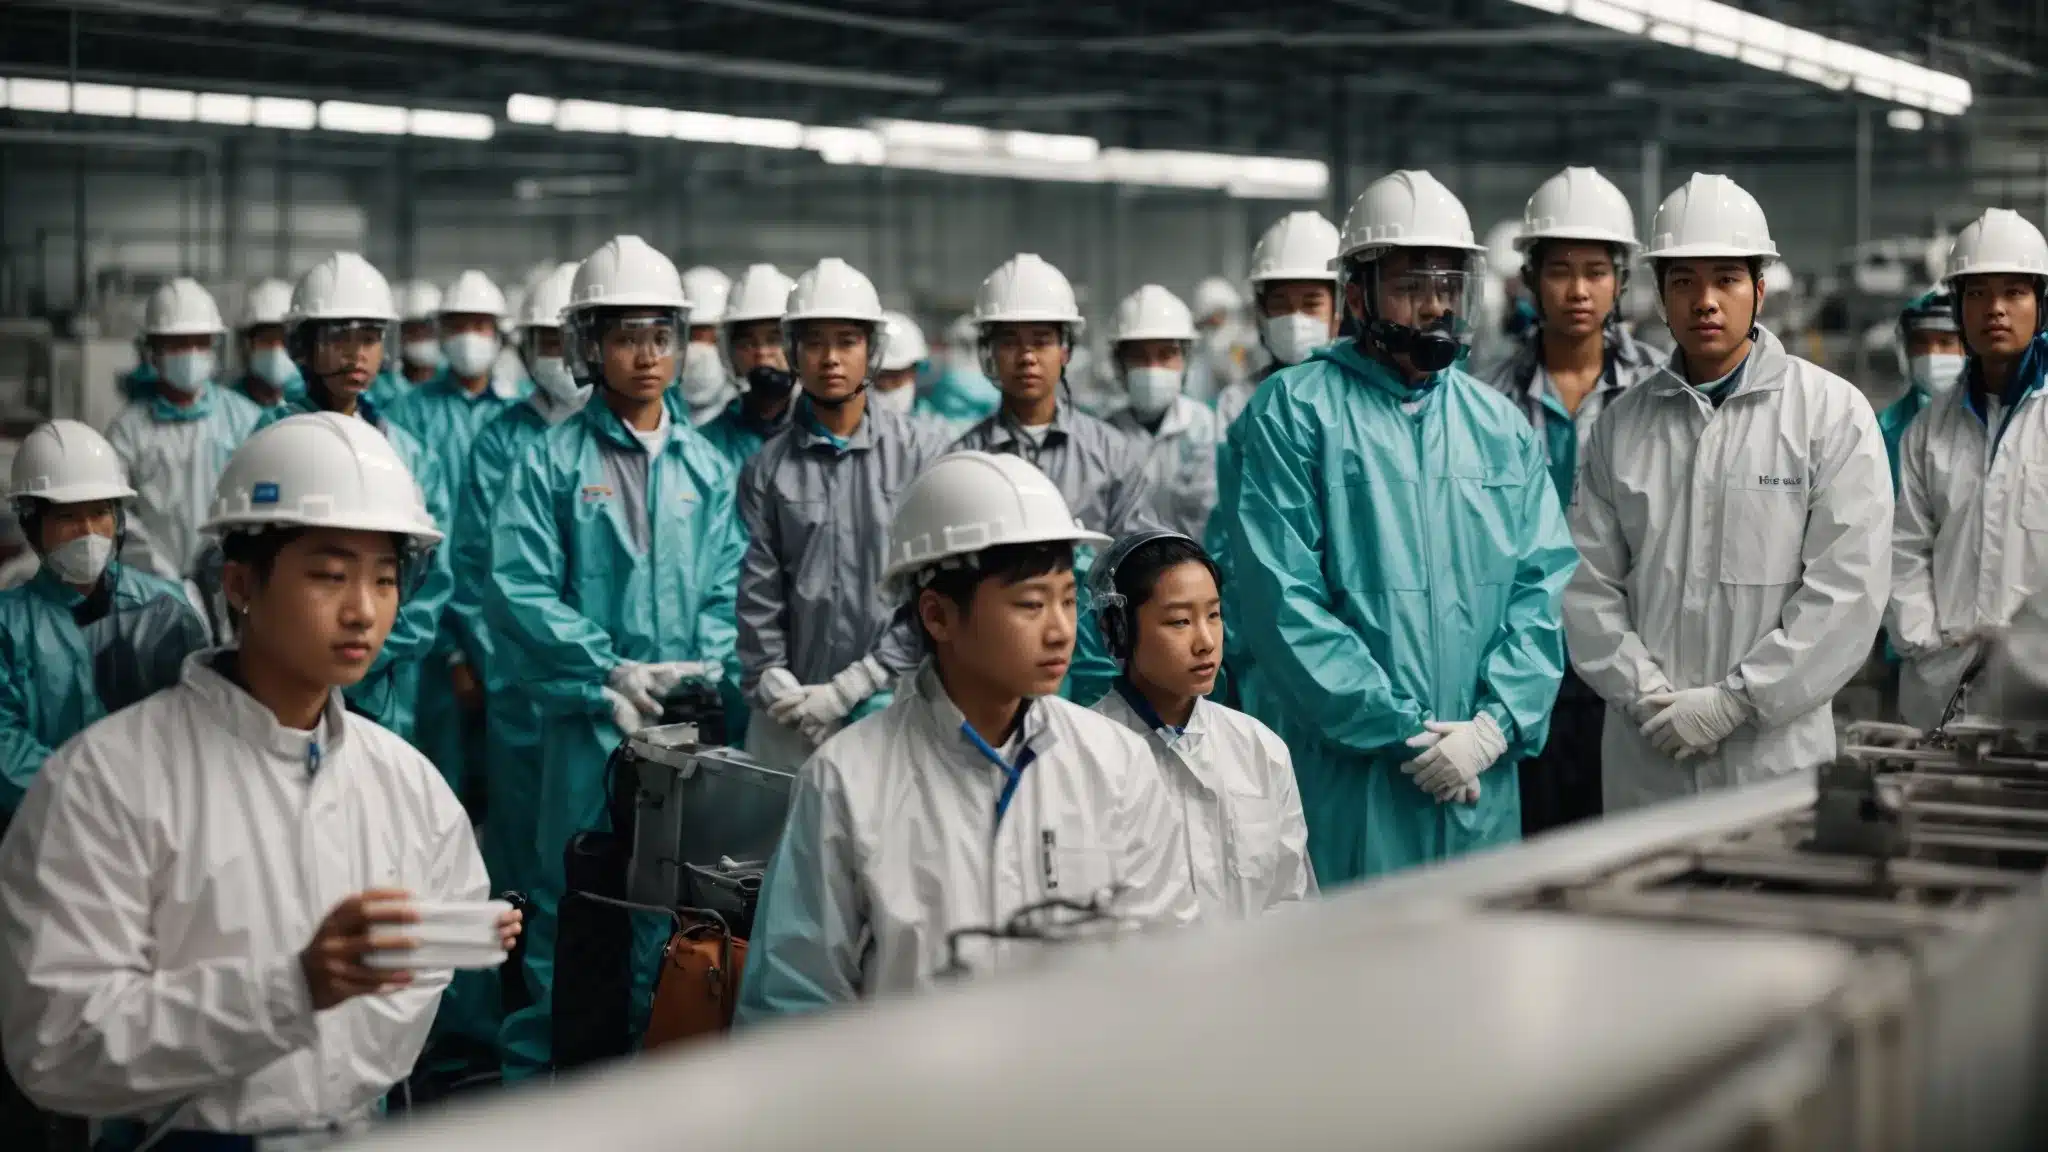 A Group Of Factory Workers Wearing Protective Gear While Attending A Safety Training Seminar.